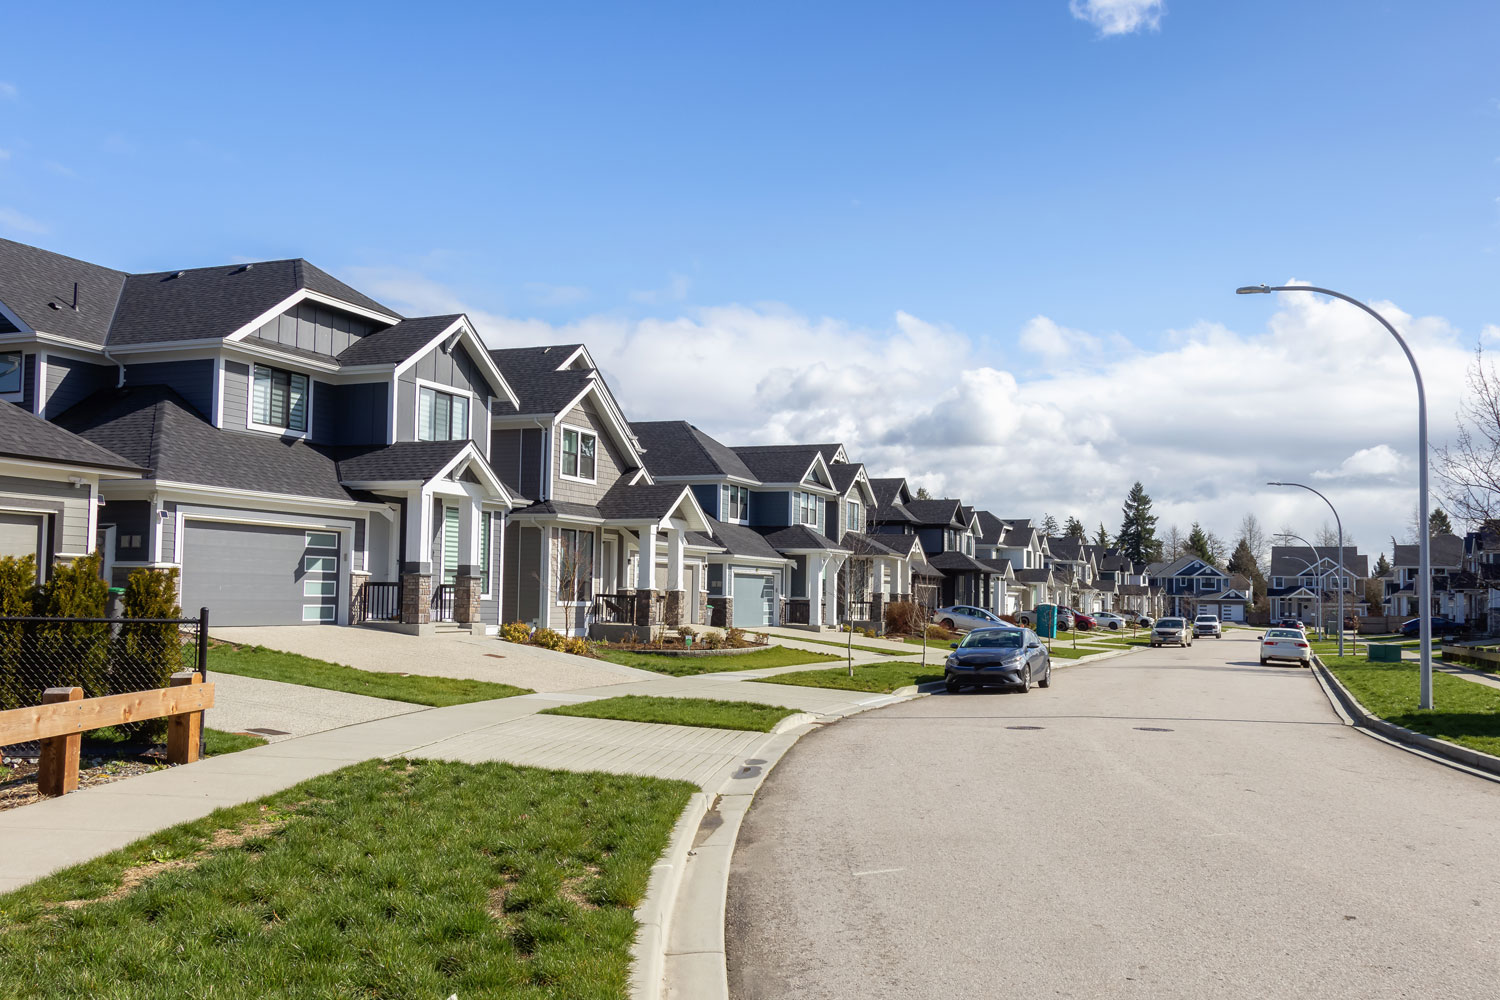 Canadian homes lined along the street to represent the housing market